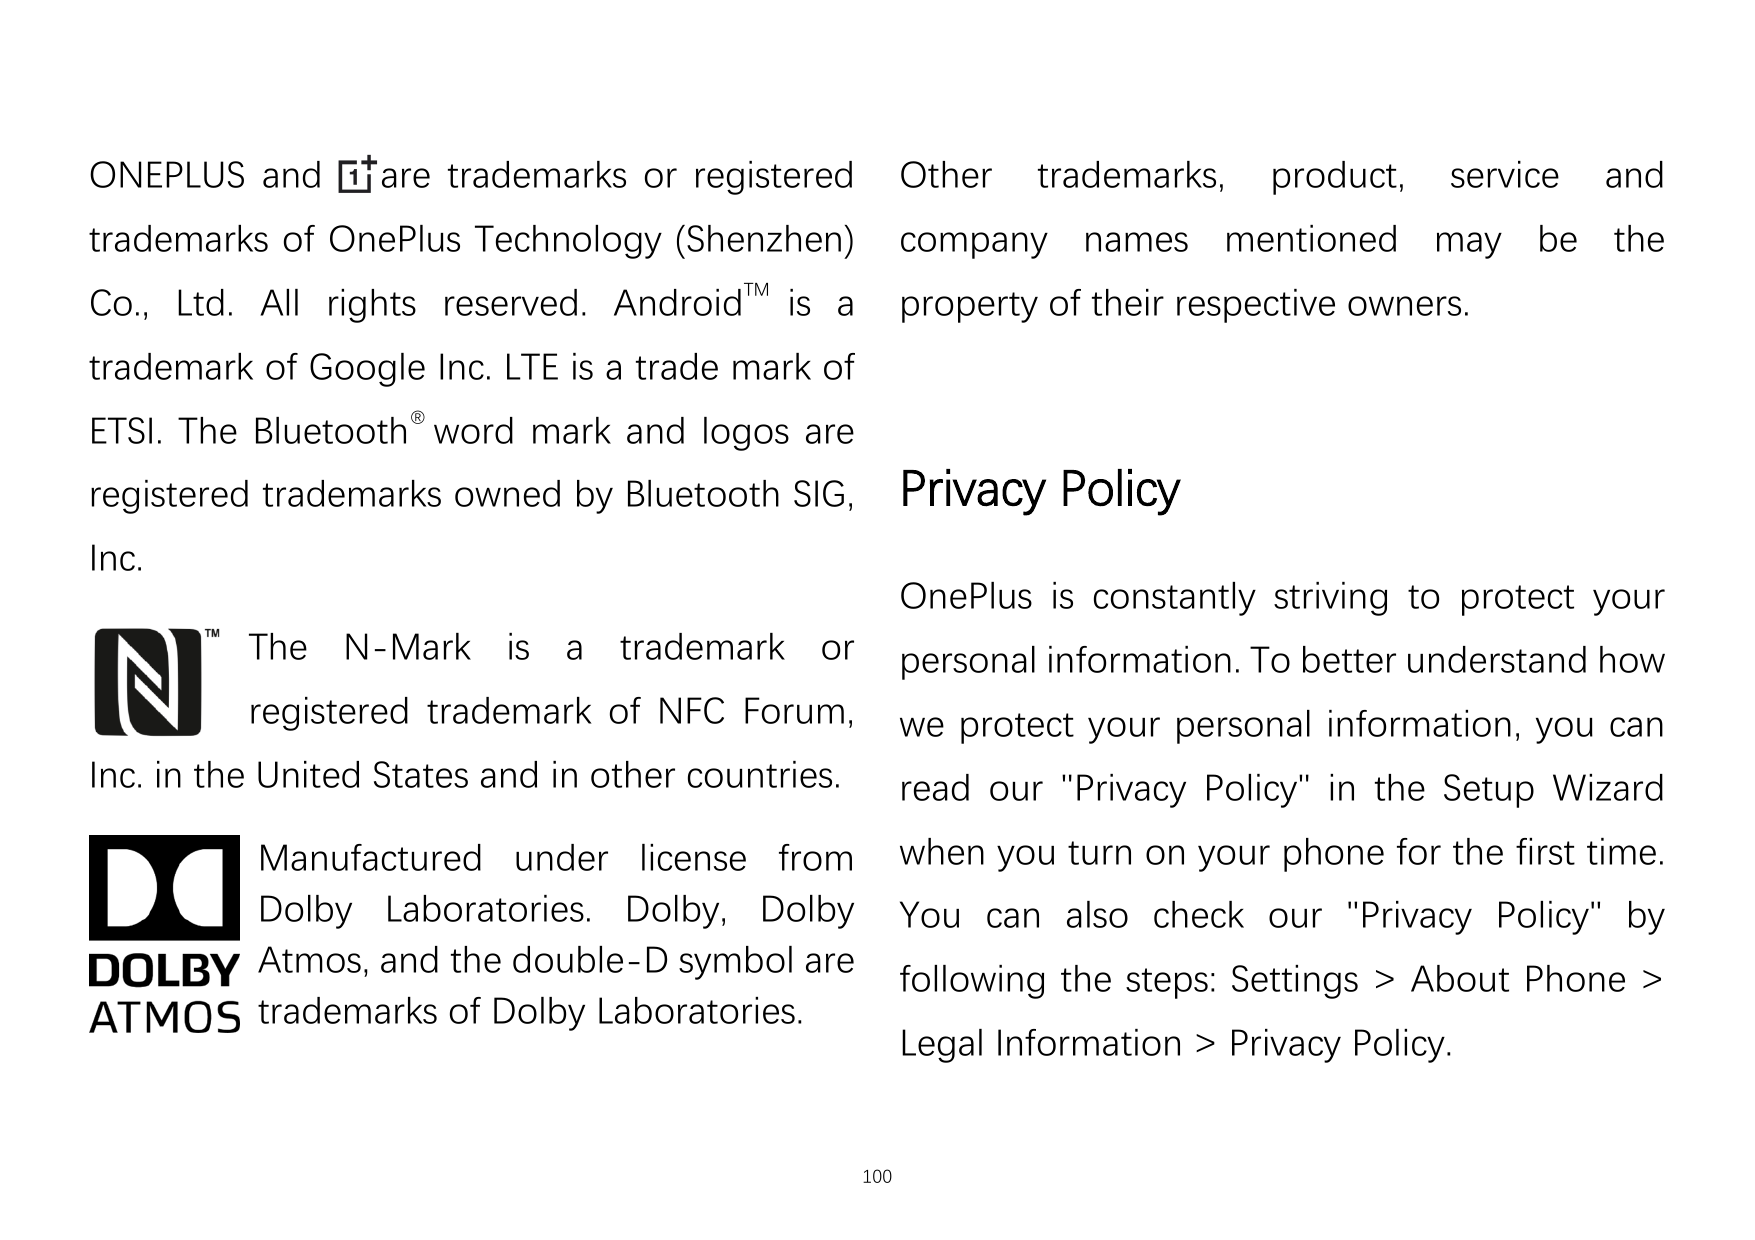 ONEPLUS andare trademarks or registeredOthertrademarks,product,serviceandtrademarks of OnePlus Technology (Shenzhen)company name